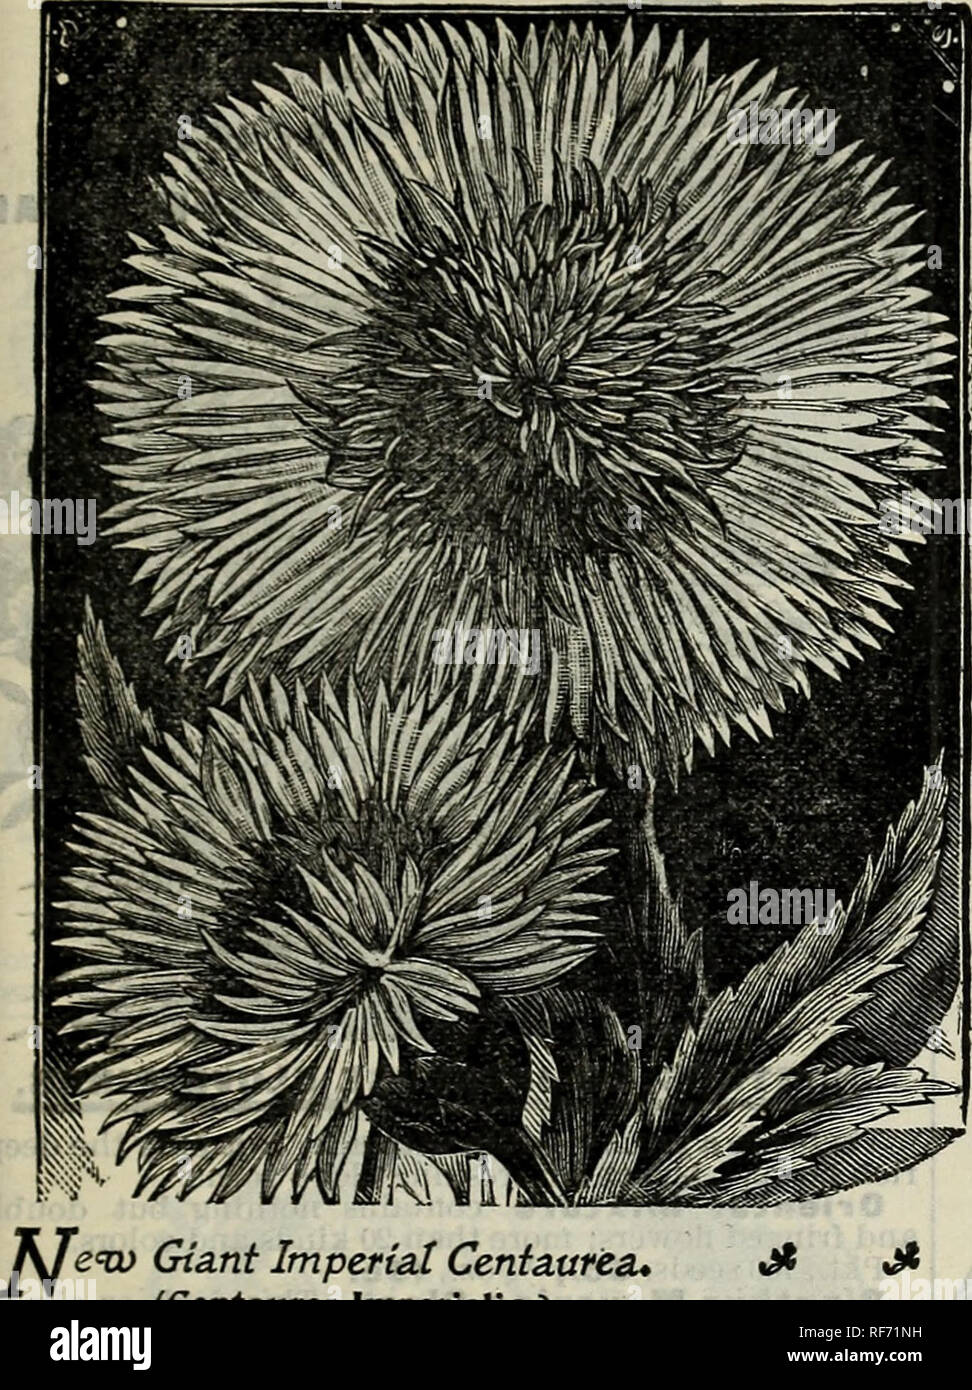 . Seeds, plants, bulbs, fruits. Nursery stock New York (State) Catalogs; Flowers Seeds Catalogs; Plants, Ornamental Catalogs. OLIVER H. DREW, HIBERNIA, NEW YORK. 26. 'e&lt;w Gta.nt Imperial Centaurea* (Centaurea Imperialis.) This magnificent new Giant Centaurea is a rapid, easy- grower, soon making a large plant. The flower stems are long, the flowers large and very sweet scented. This new Centaurea, a cross between C. Moschata and Margaret, represents the best that has been produced in these beautiful summer-blooming plants. The bushes are about 4 feet high, of enormous dimensions and are cov Stock Photo